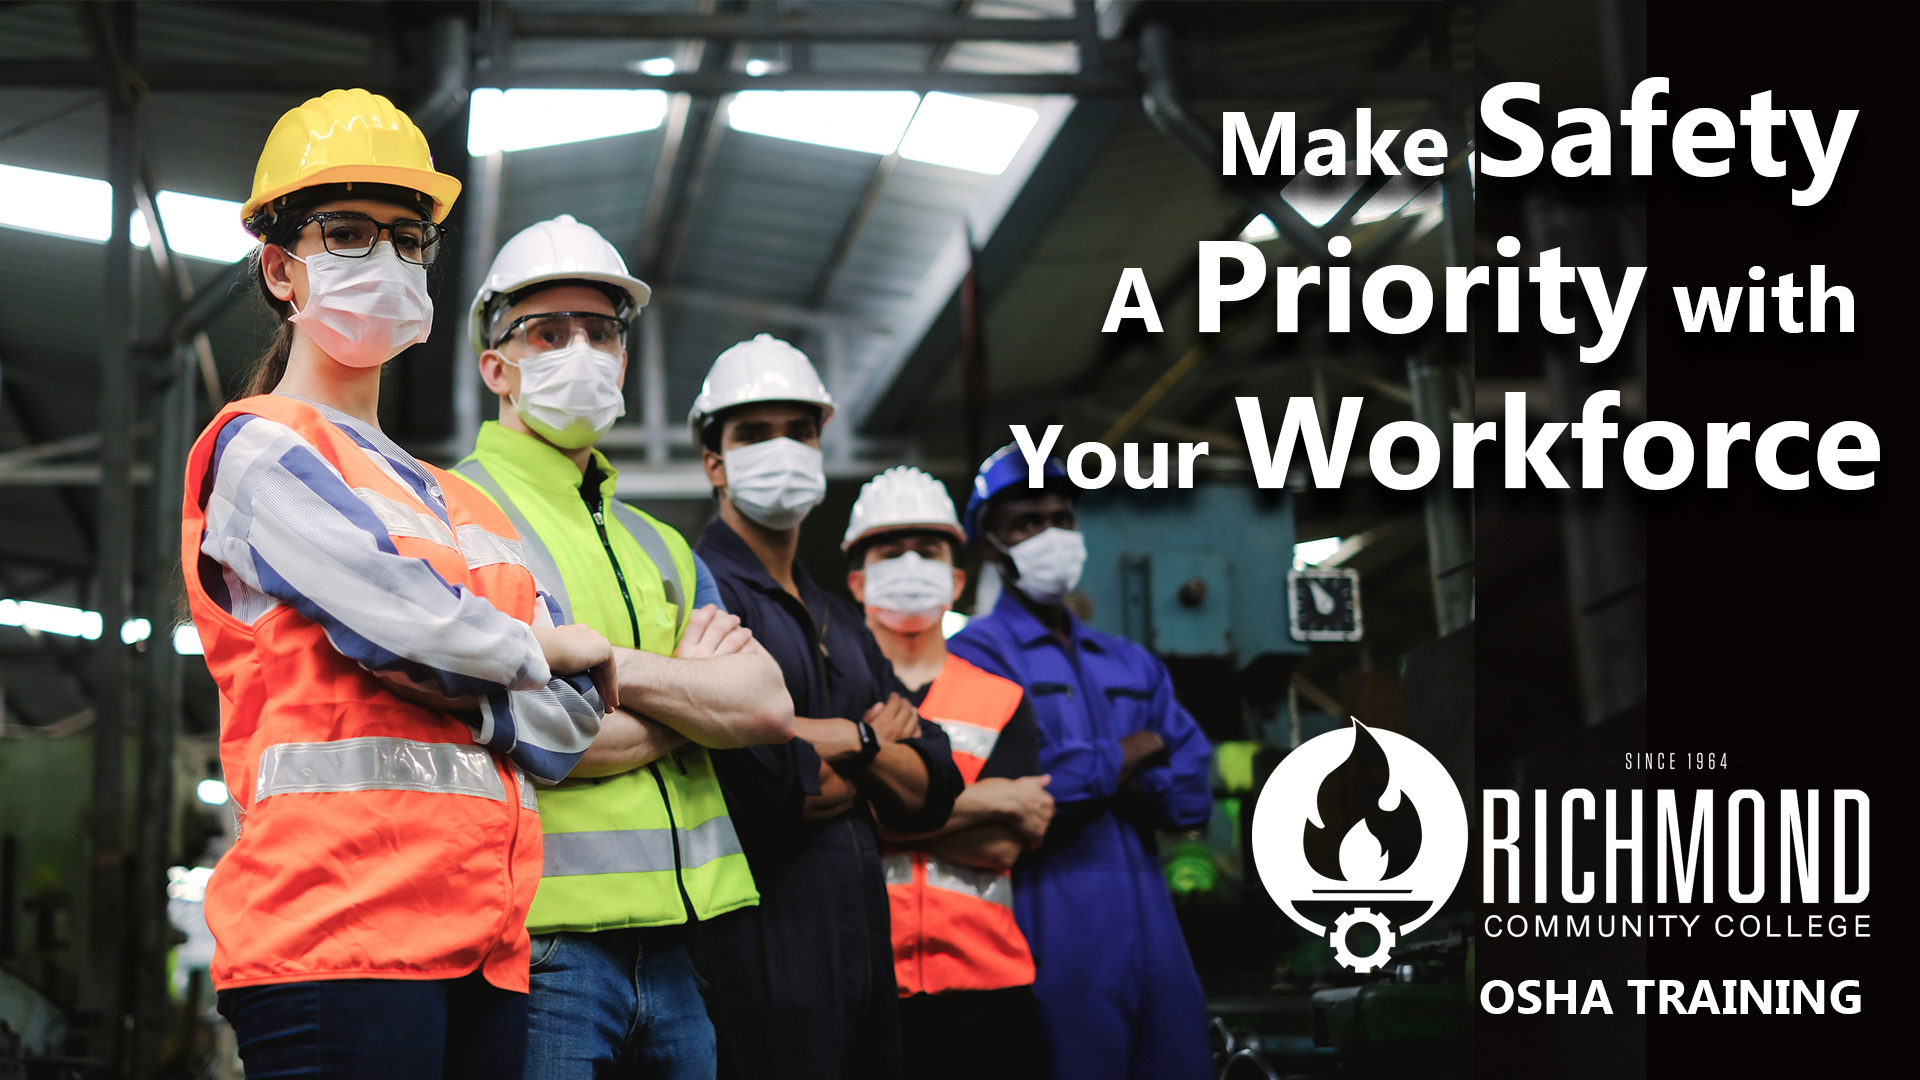 A photo of people in an industrial setting with the words "Make Safety a Priority with Your Workforce," and the RCC logo and the words "OSHA Training."